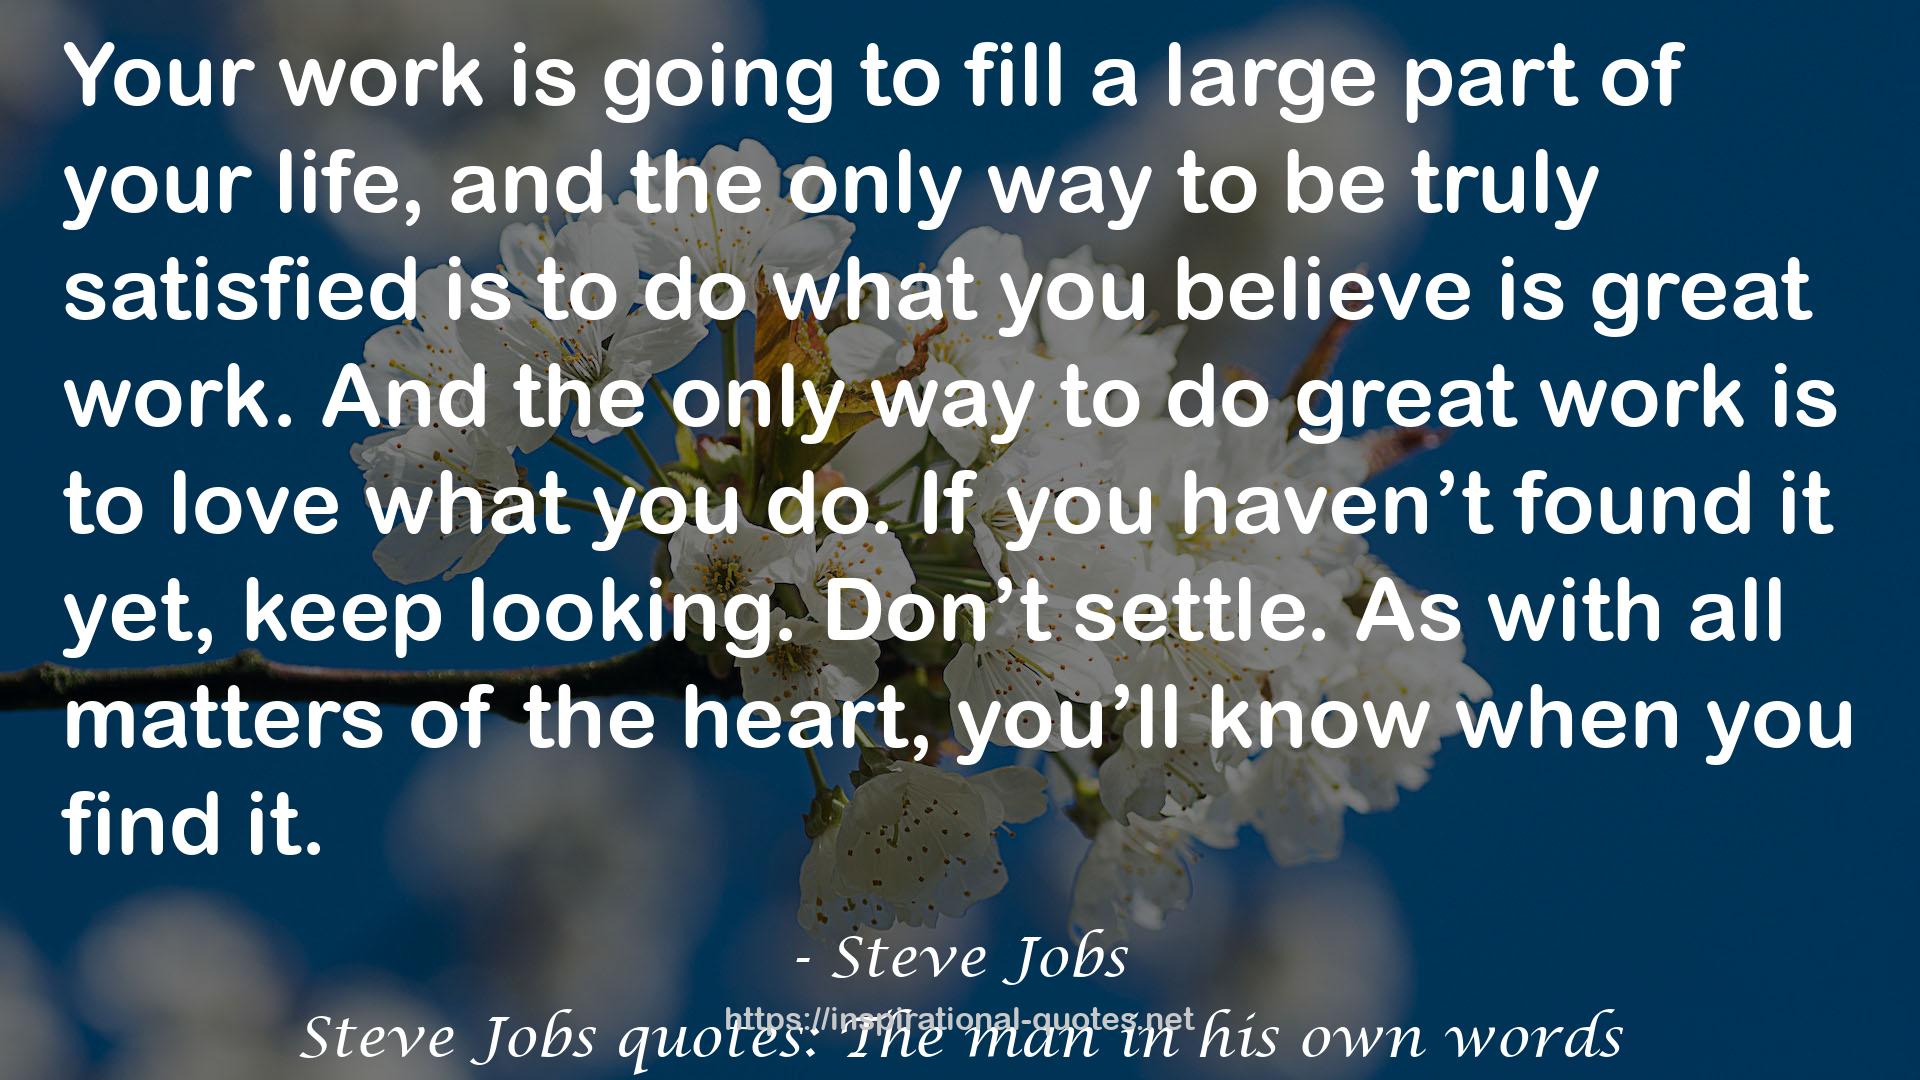 Steve Jobs quotes: The man in his own words QUOTES